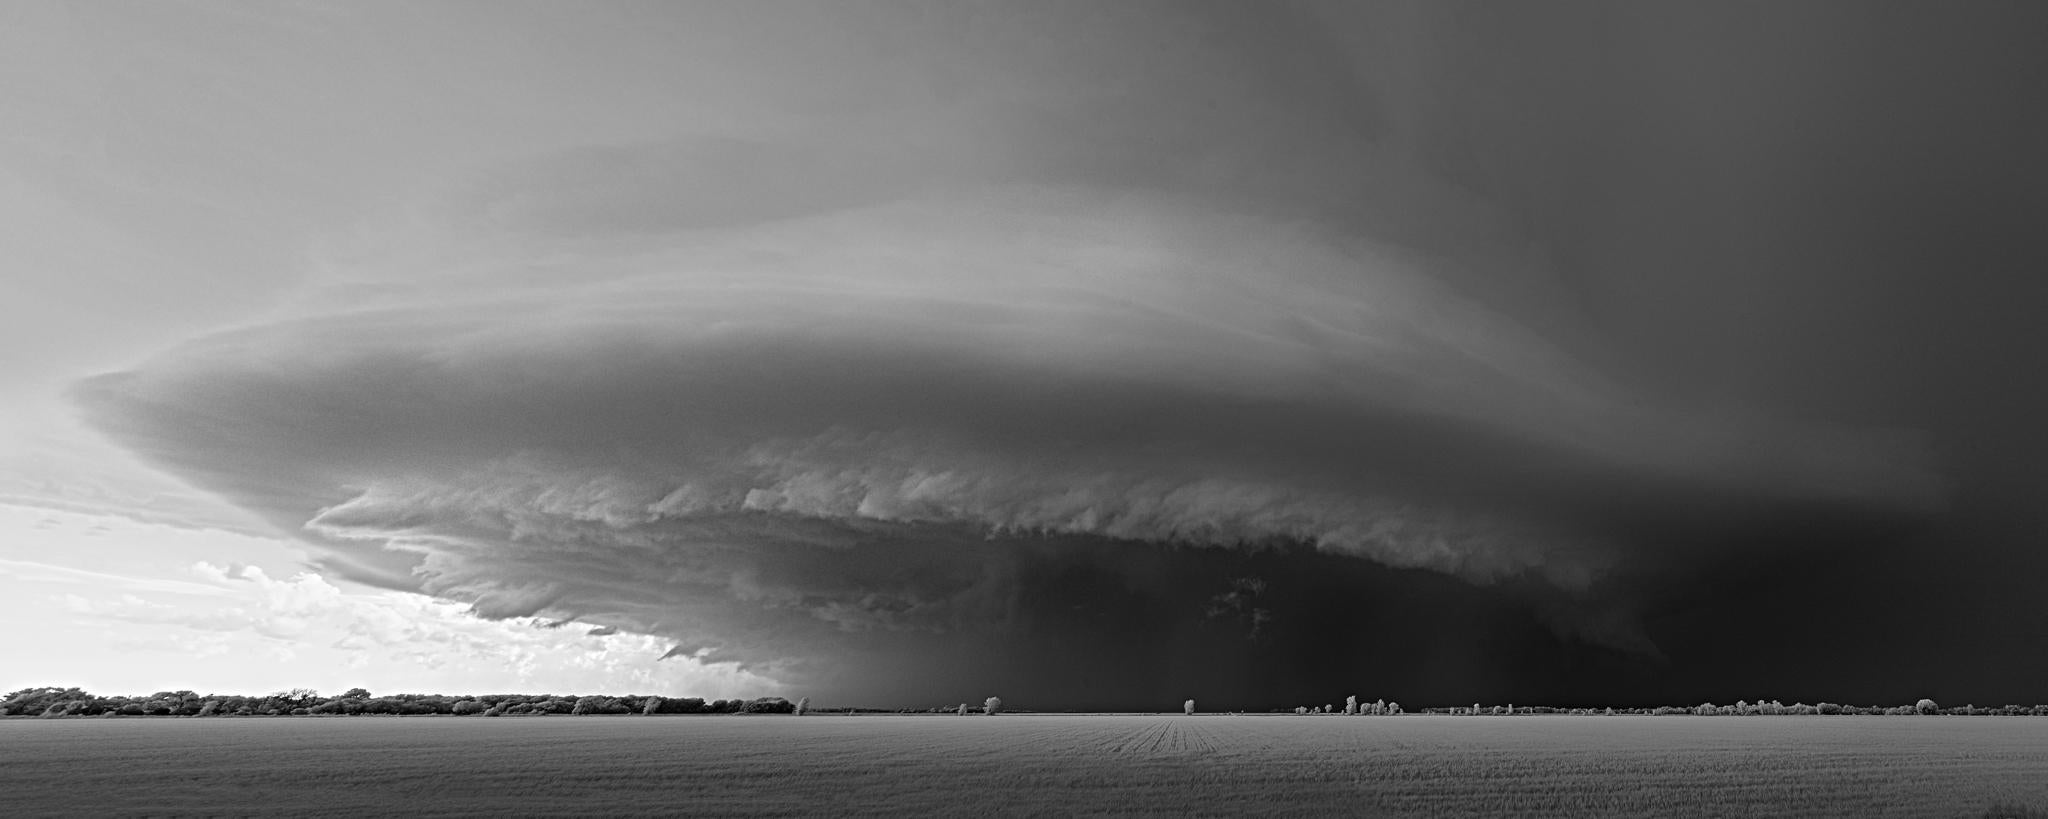 Mitch Dobrowner Black and White Photograph - Saucer Over Northern Plains, limited edition, signed, archival pigment ink